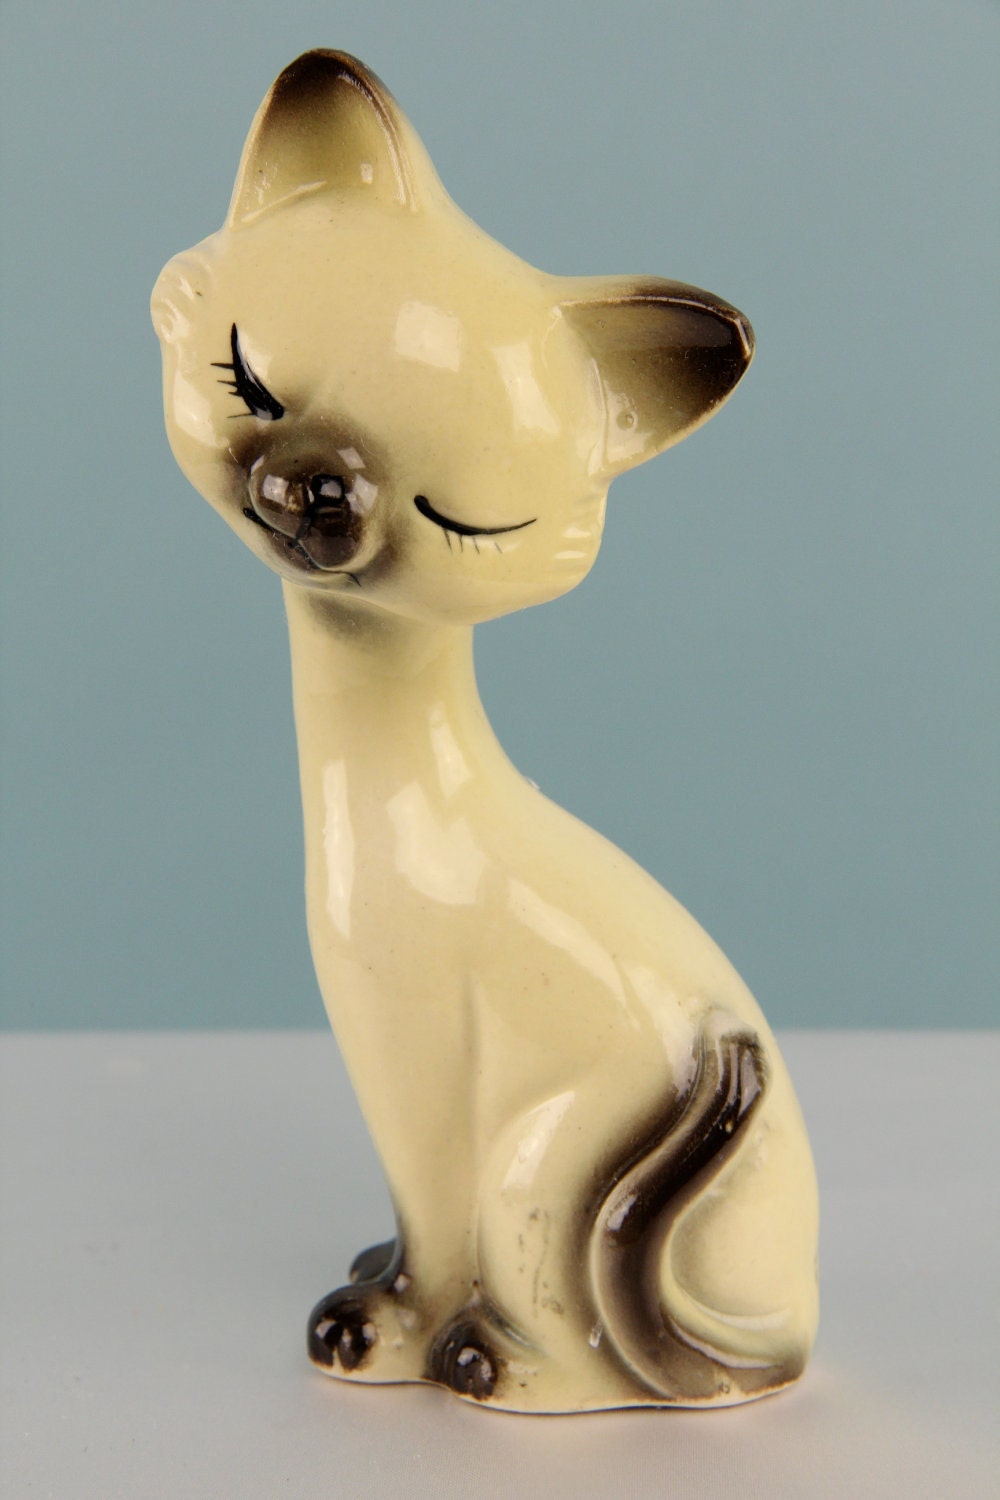  Vintage  1950s Yellow Kitty Cat  Figurine  Porcelain Statue Long